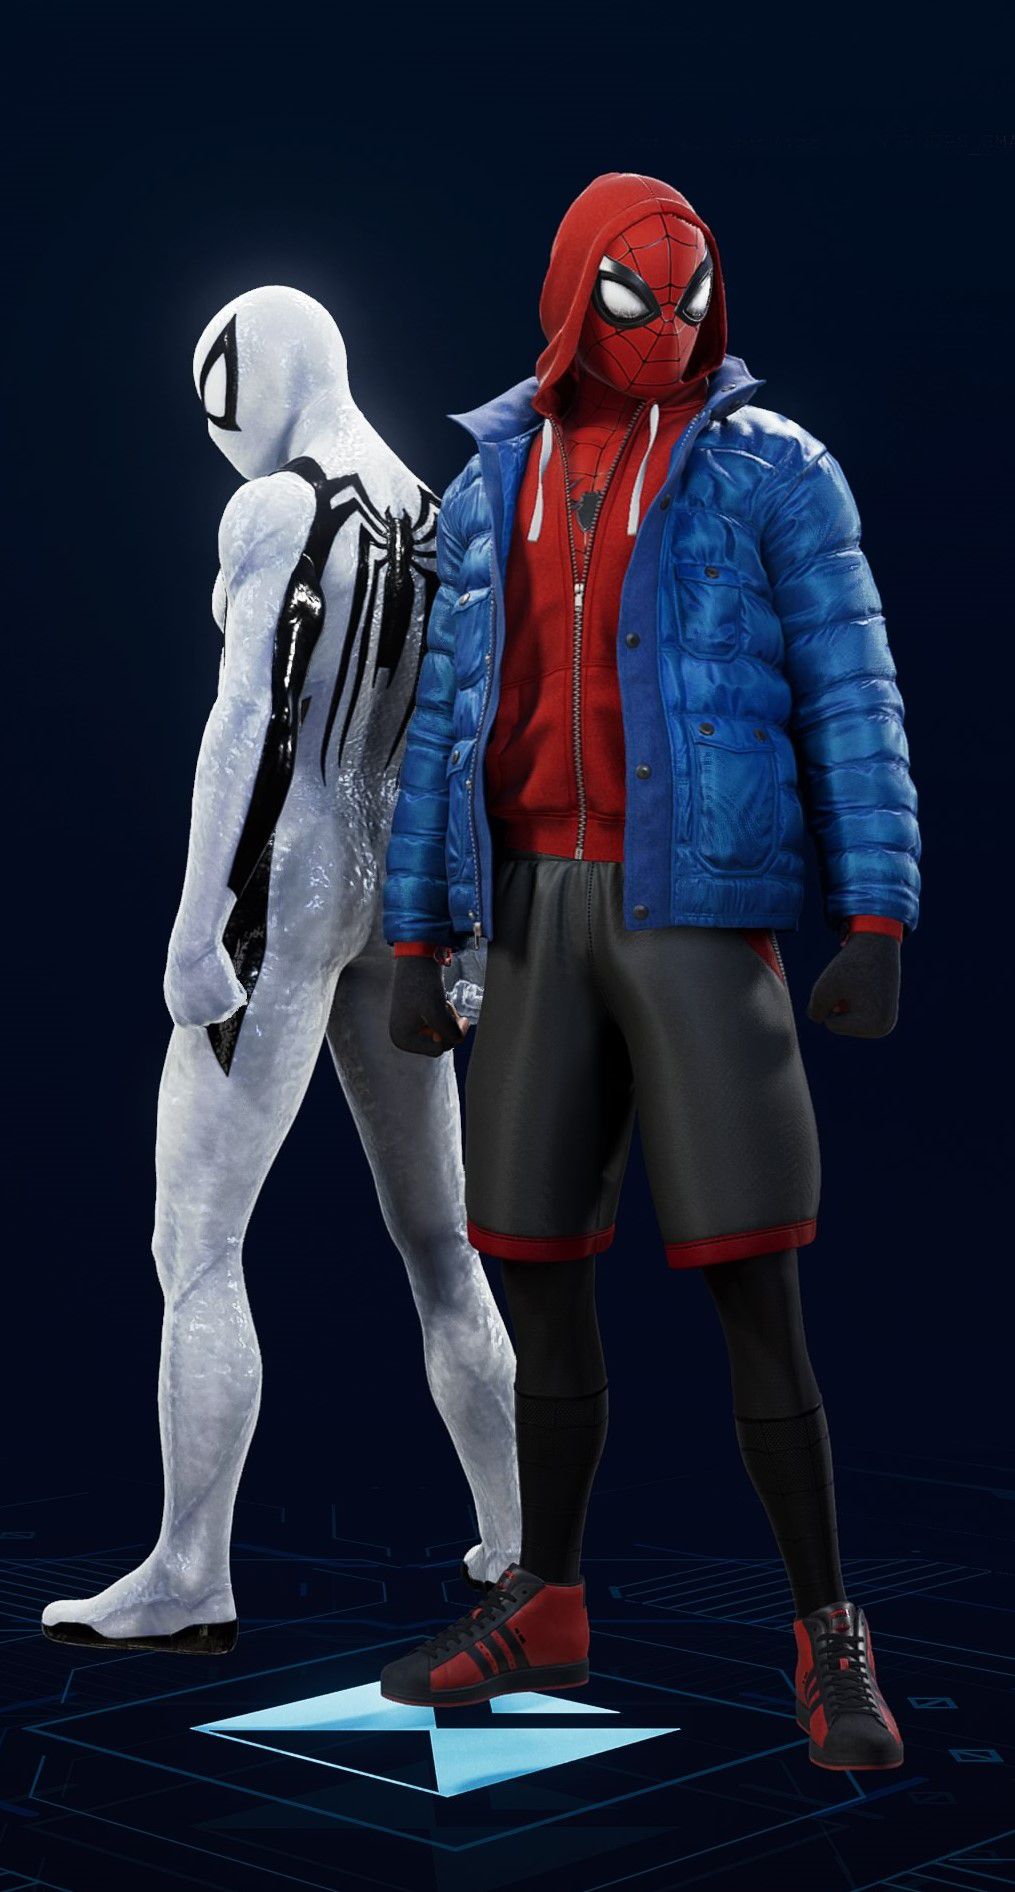 Miles Morales stands in his Sportswear Suit in the suit selection screen of Spider-Man 2.